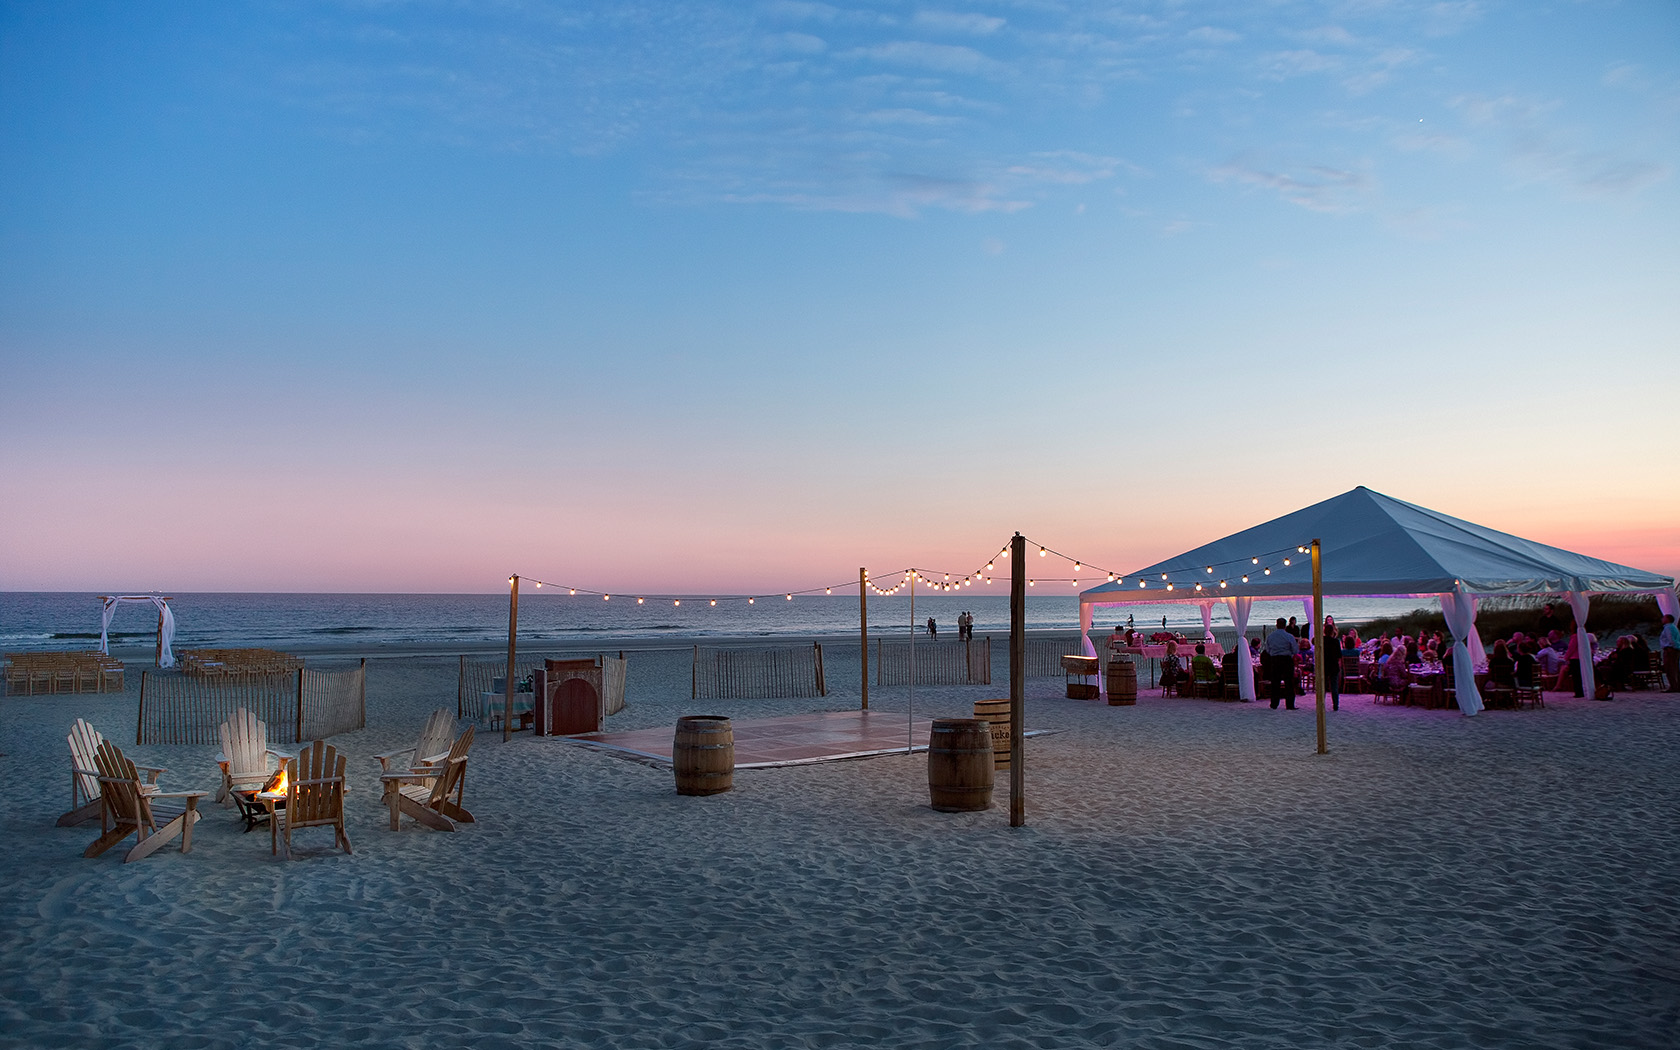 the sun setting and a dance floor that is on the beach